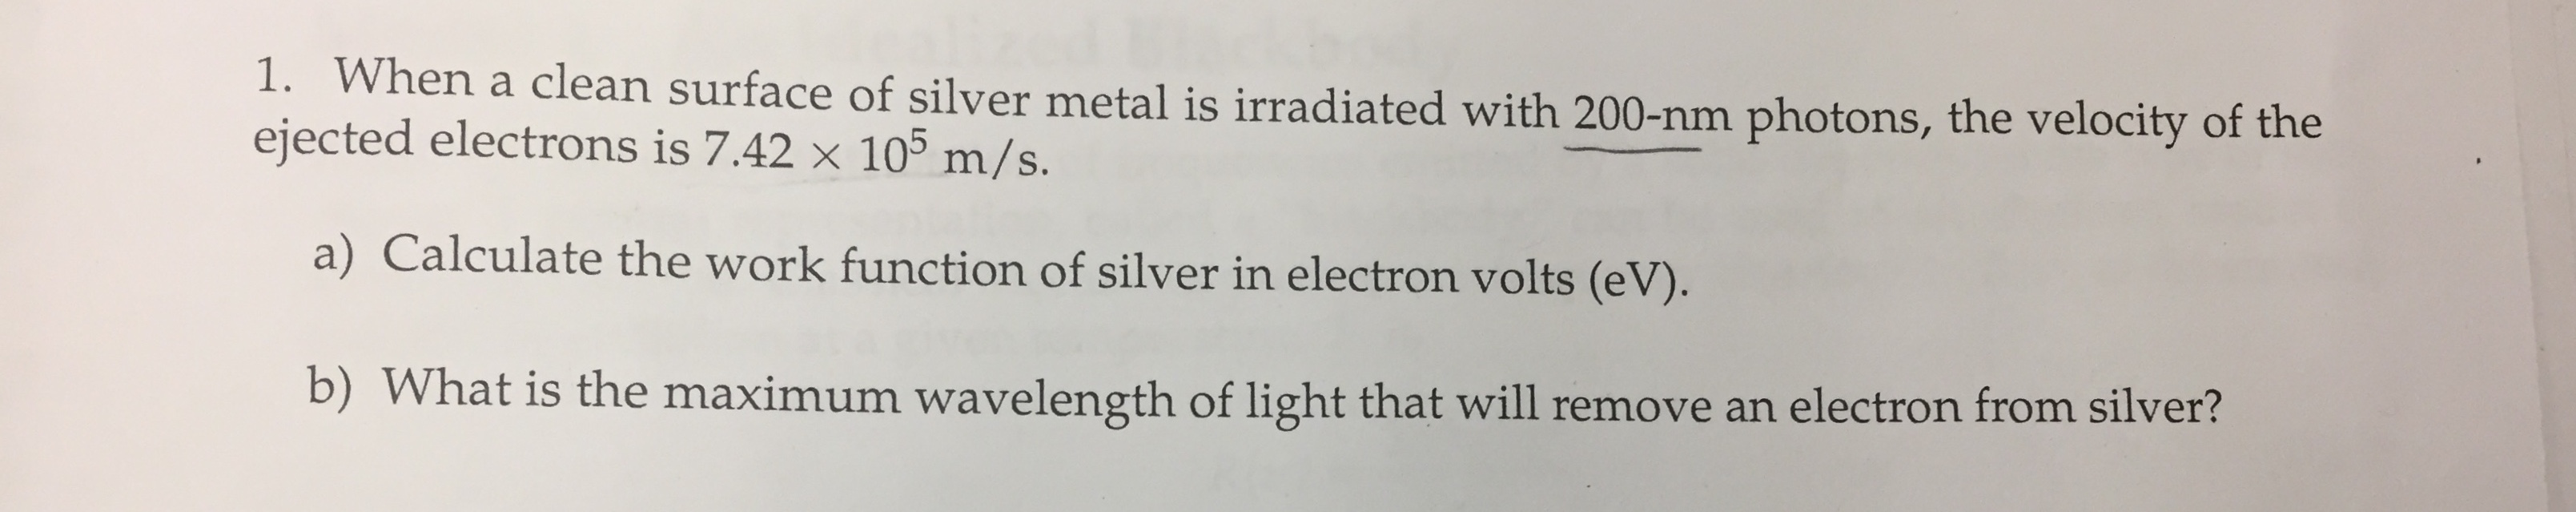 1. When a clean surface of silver metal is iradiated with 200-mm photons, the velocity of the
ejected electrons is 742 × 105 m/s.
a) Calculate the work function of silver in electron volts (ev.
b) What is the maximum wavelength of light that will remove an electron from silver?
